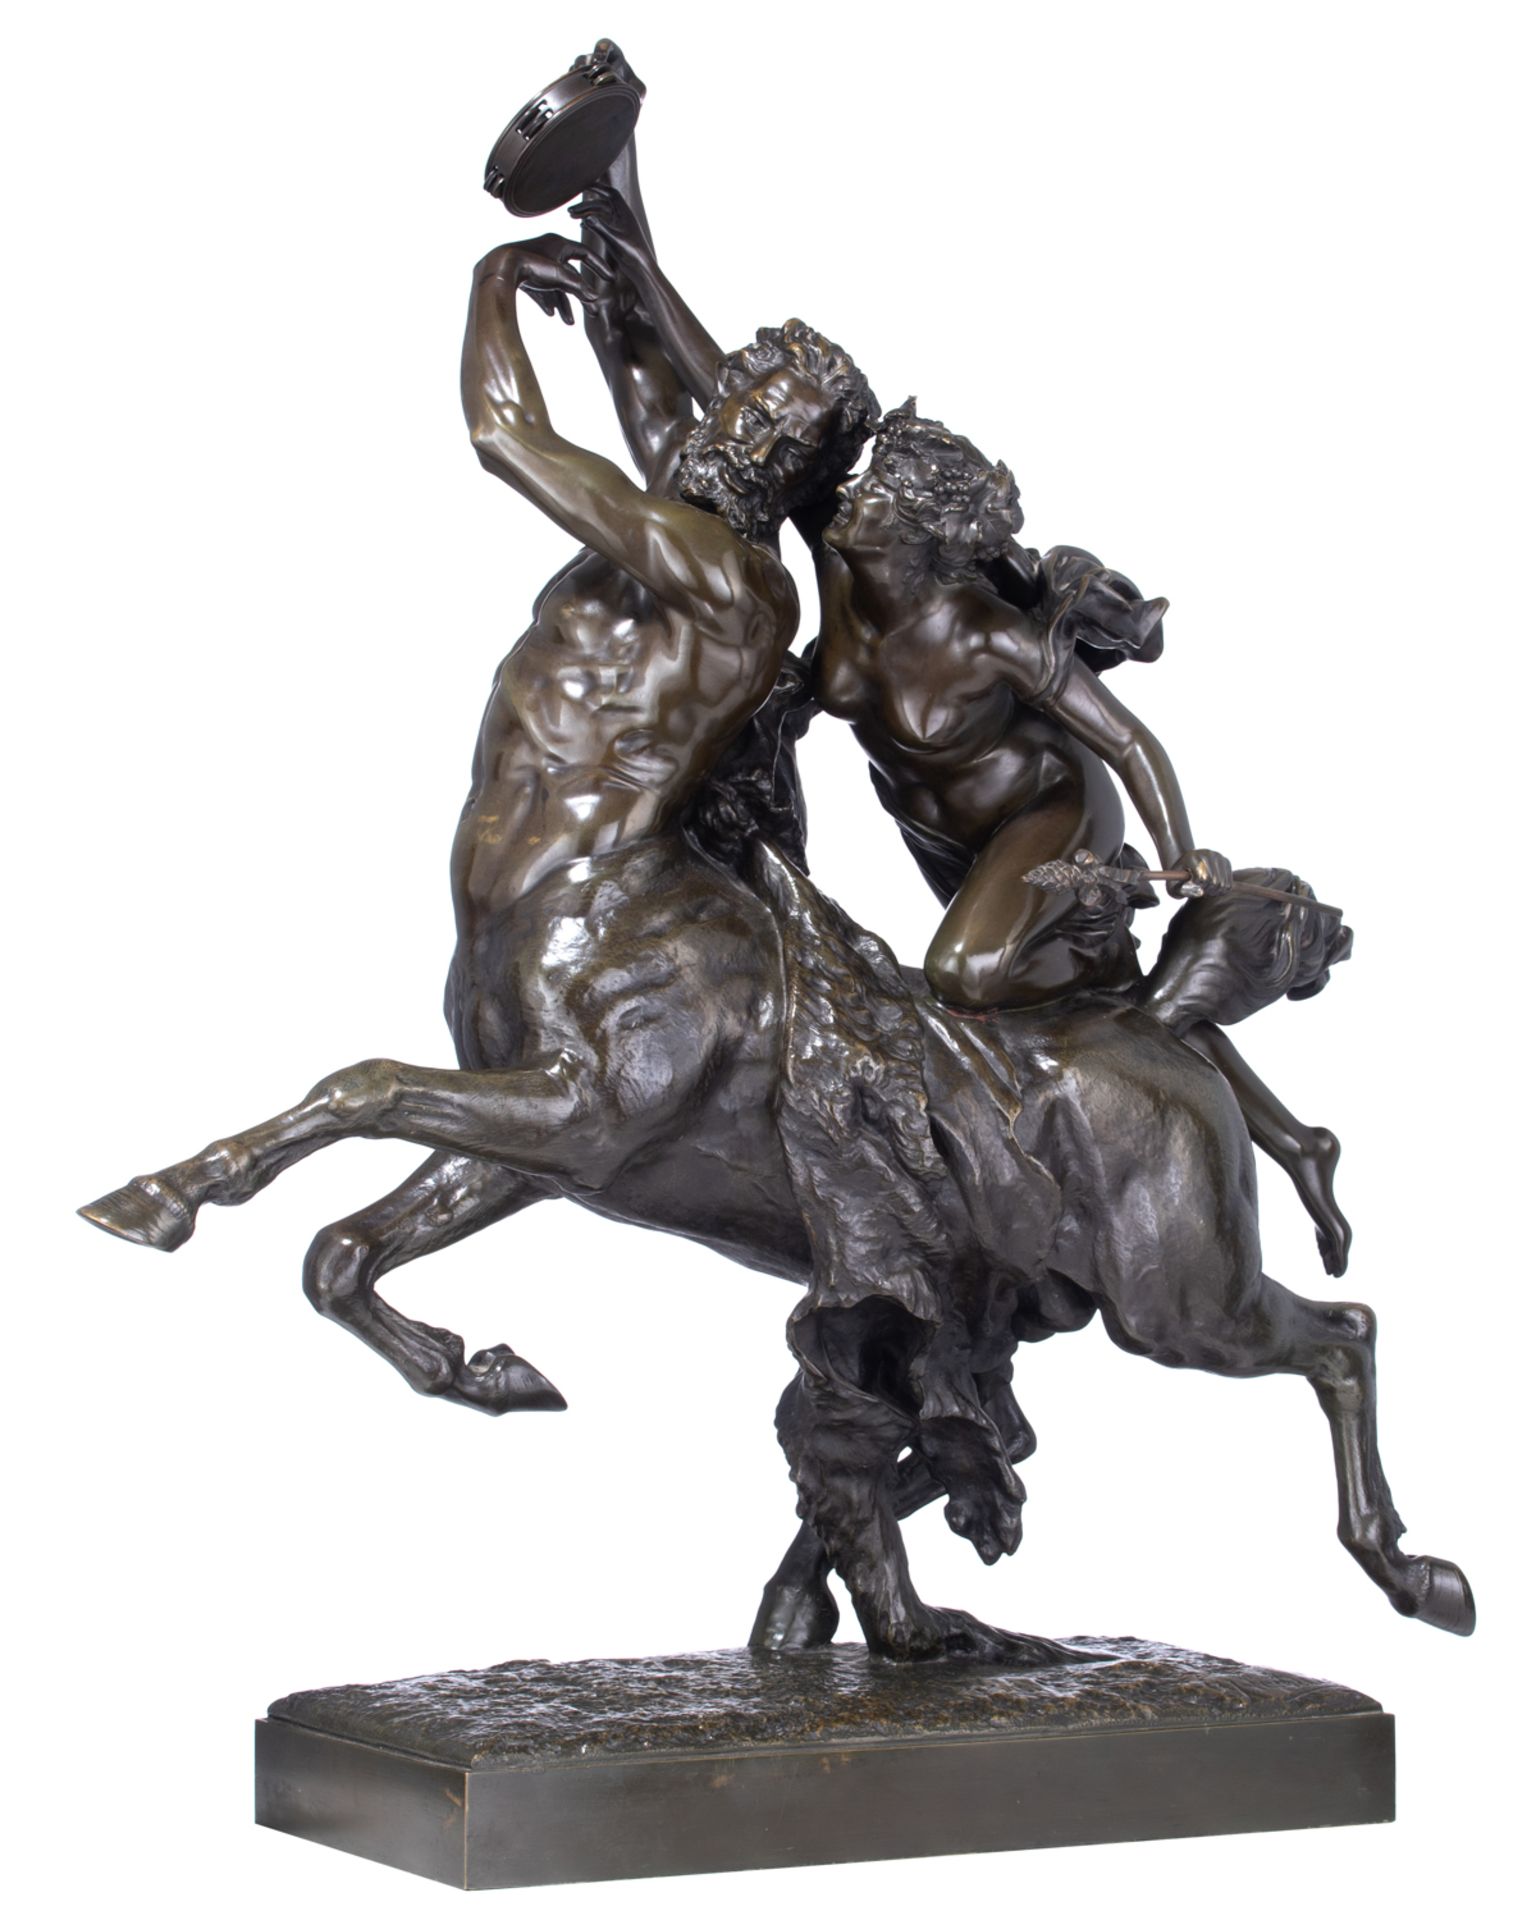 Leduc A.J., the centaur Nessus carrying off Deianeira, the wife of Heracles, patinated bronze, H 94